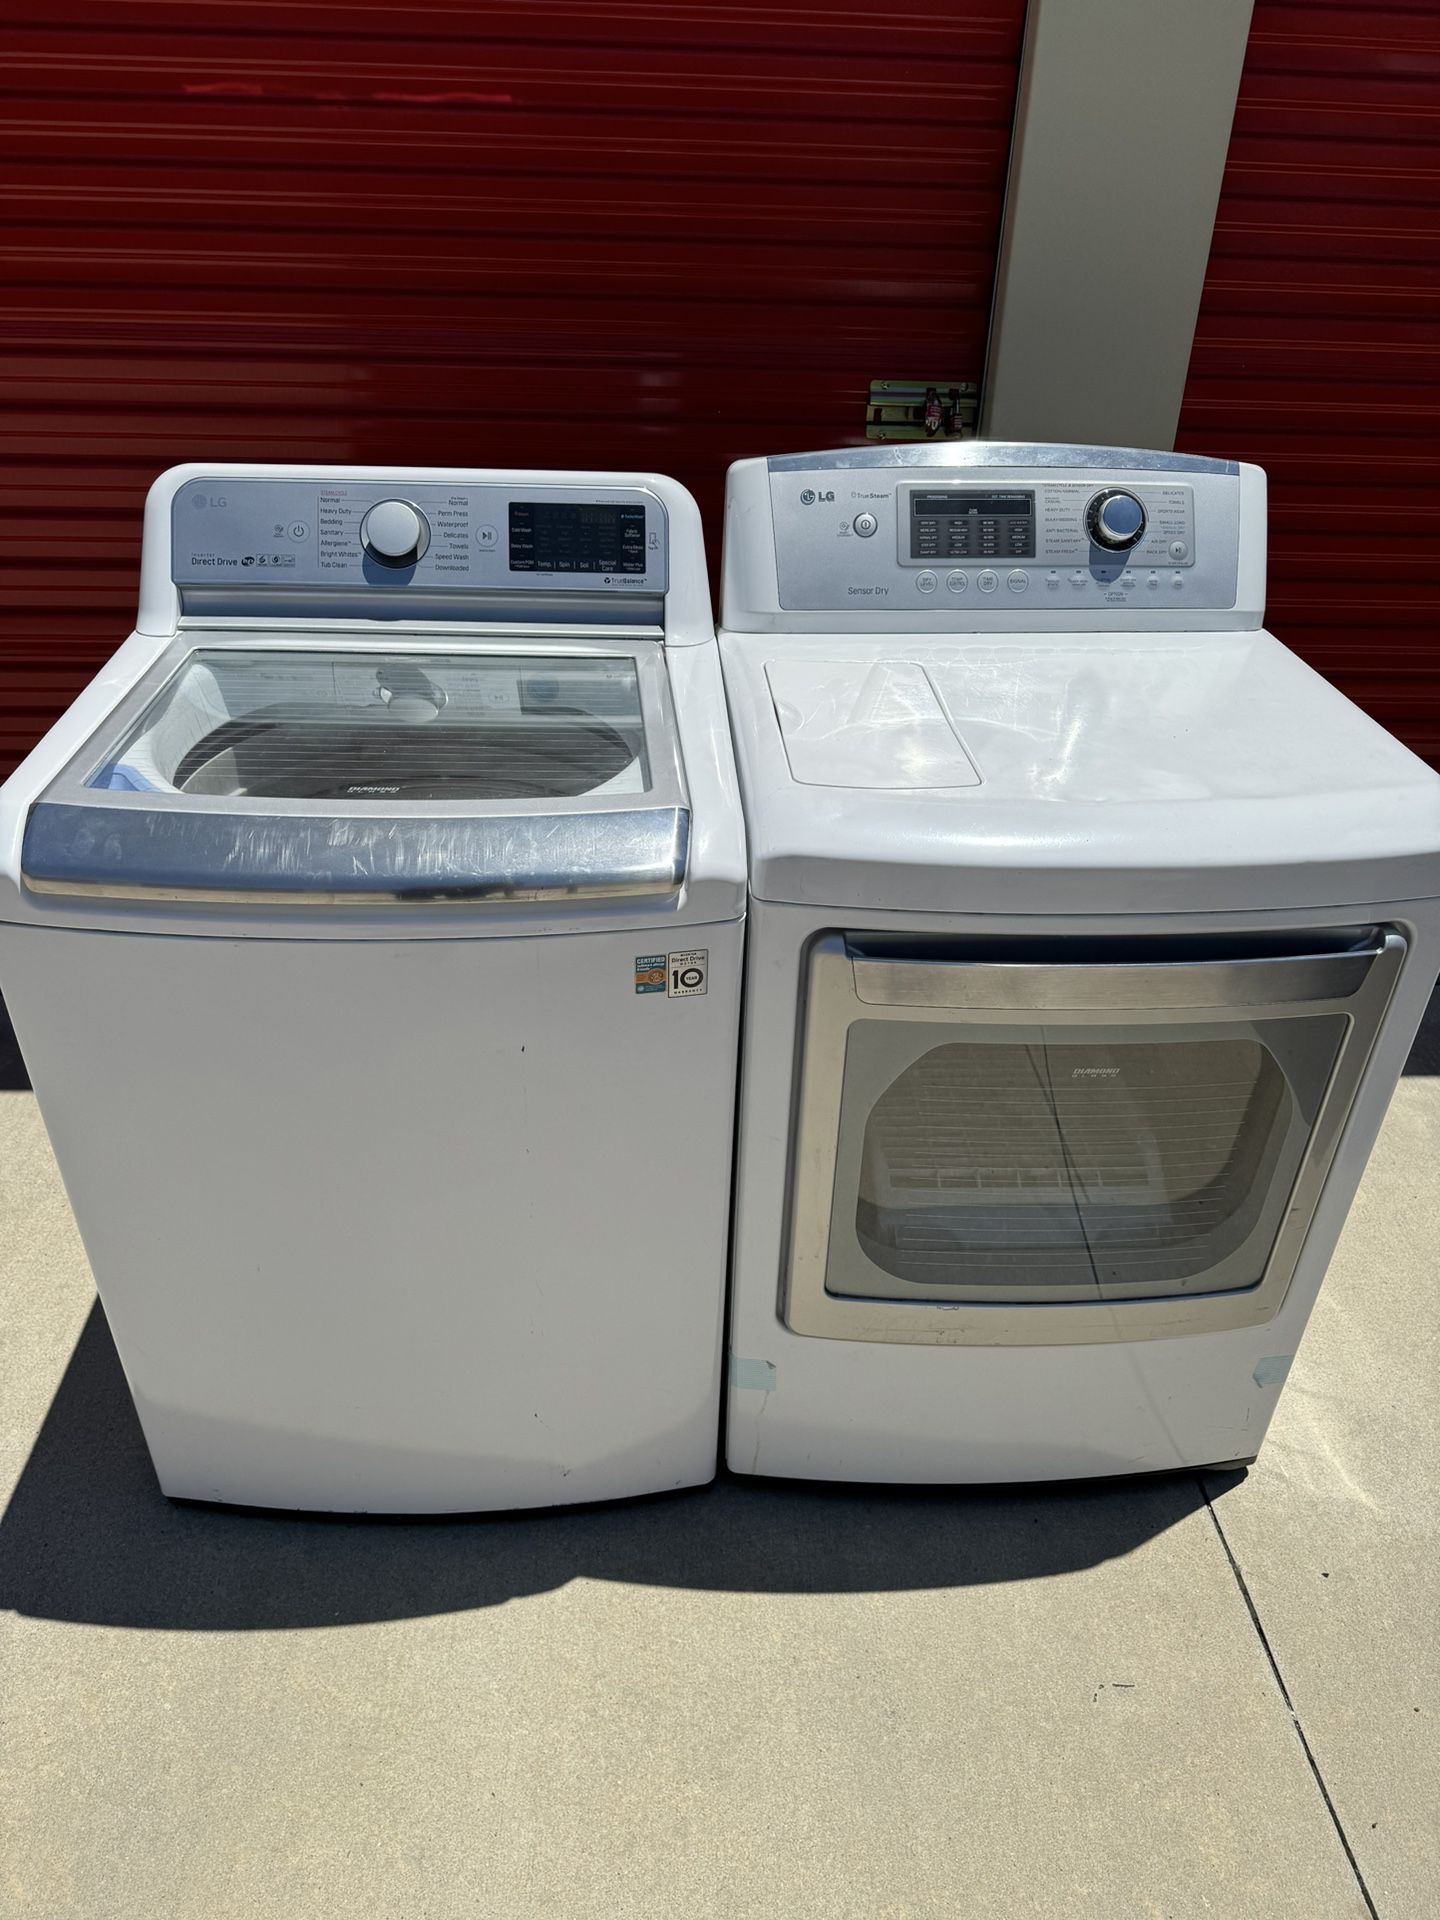 LG washer and dryer set 